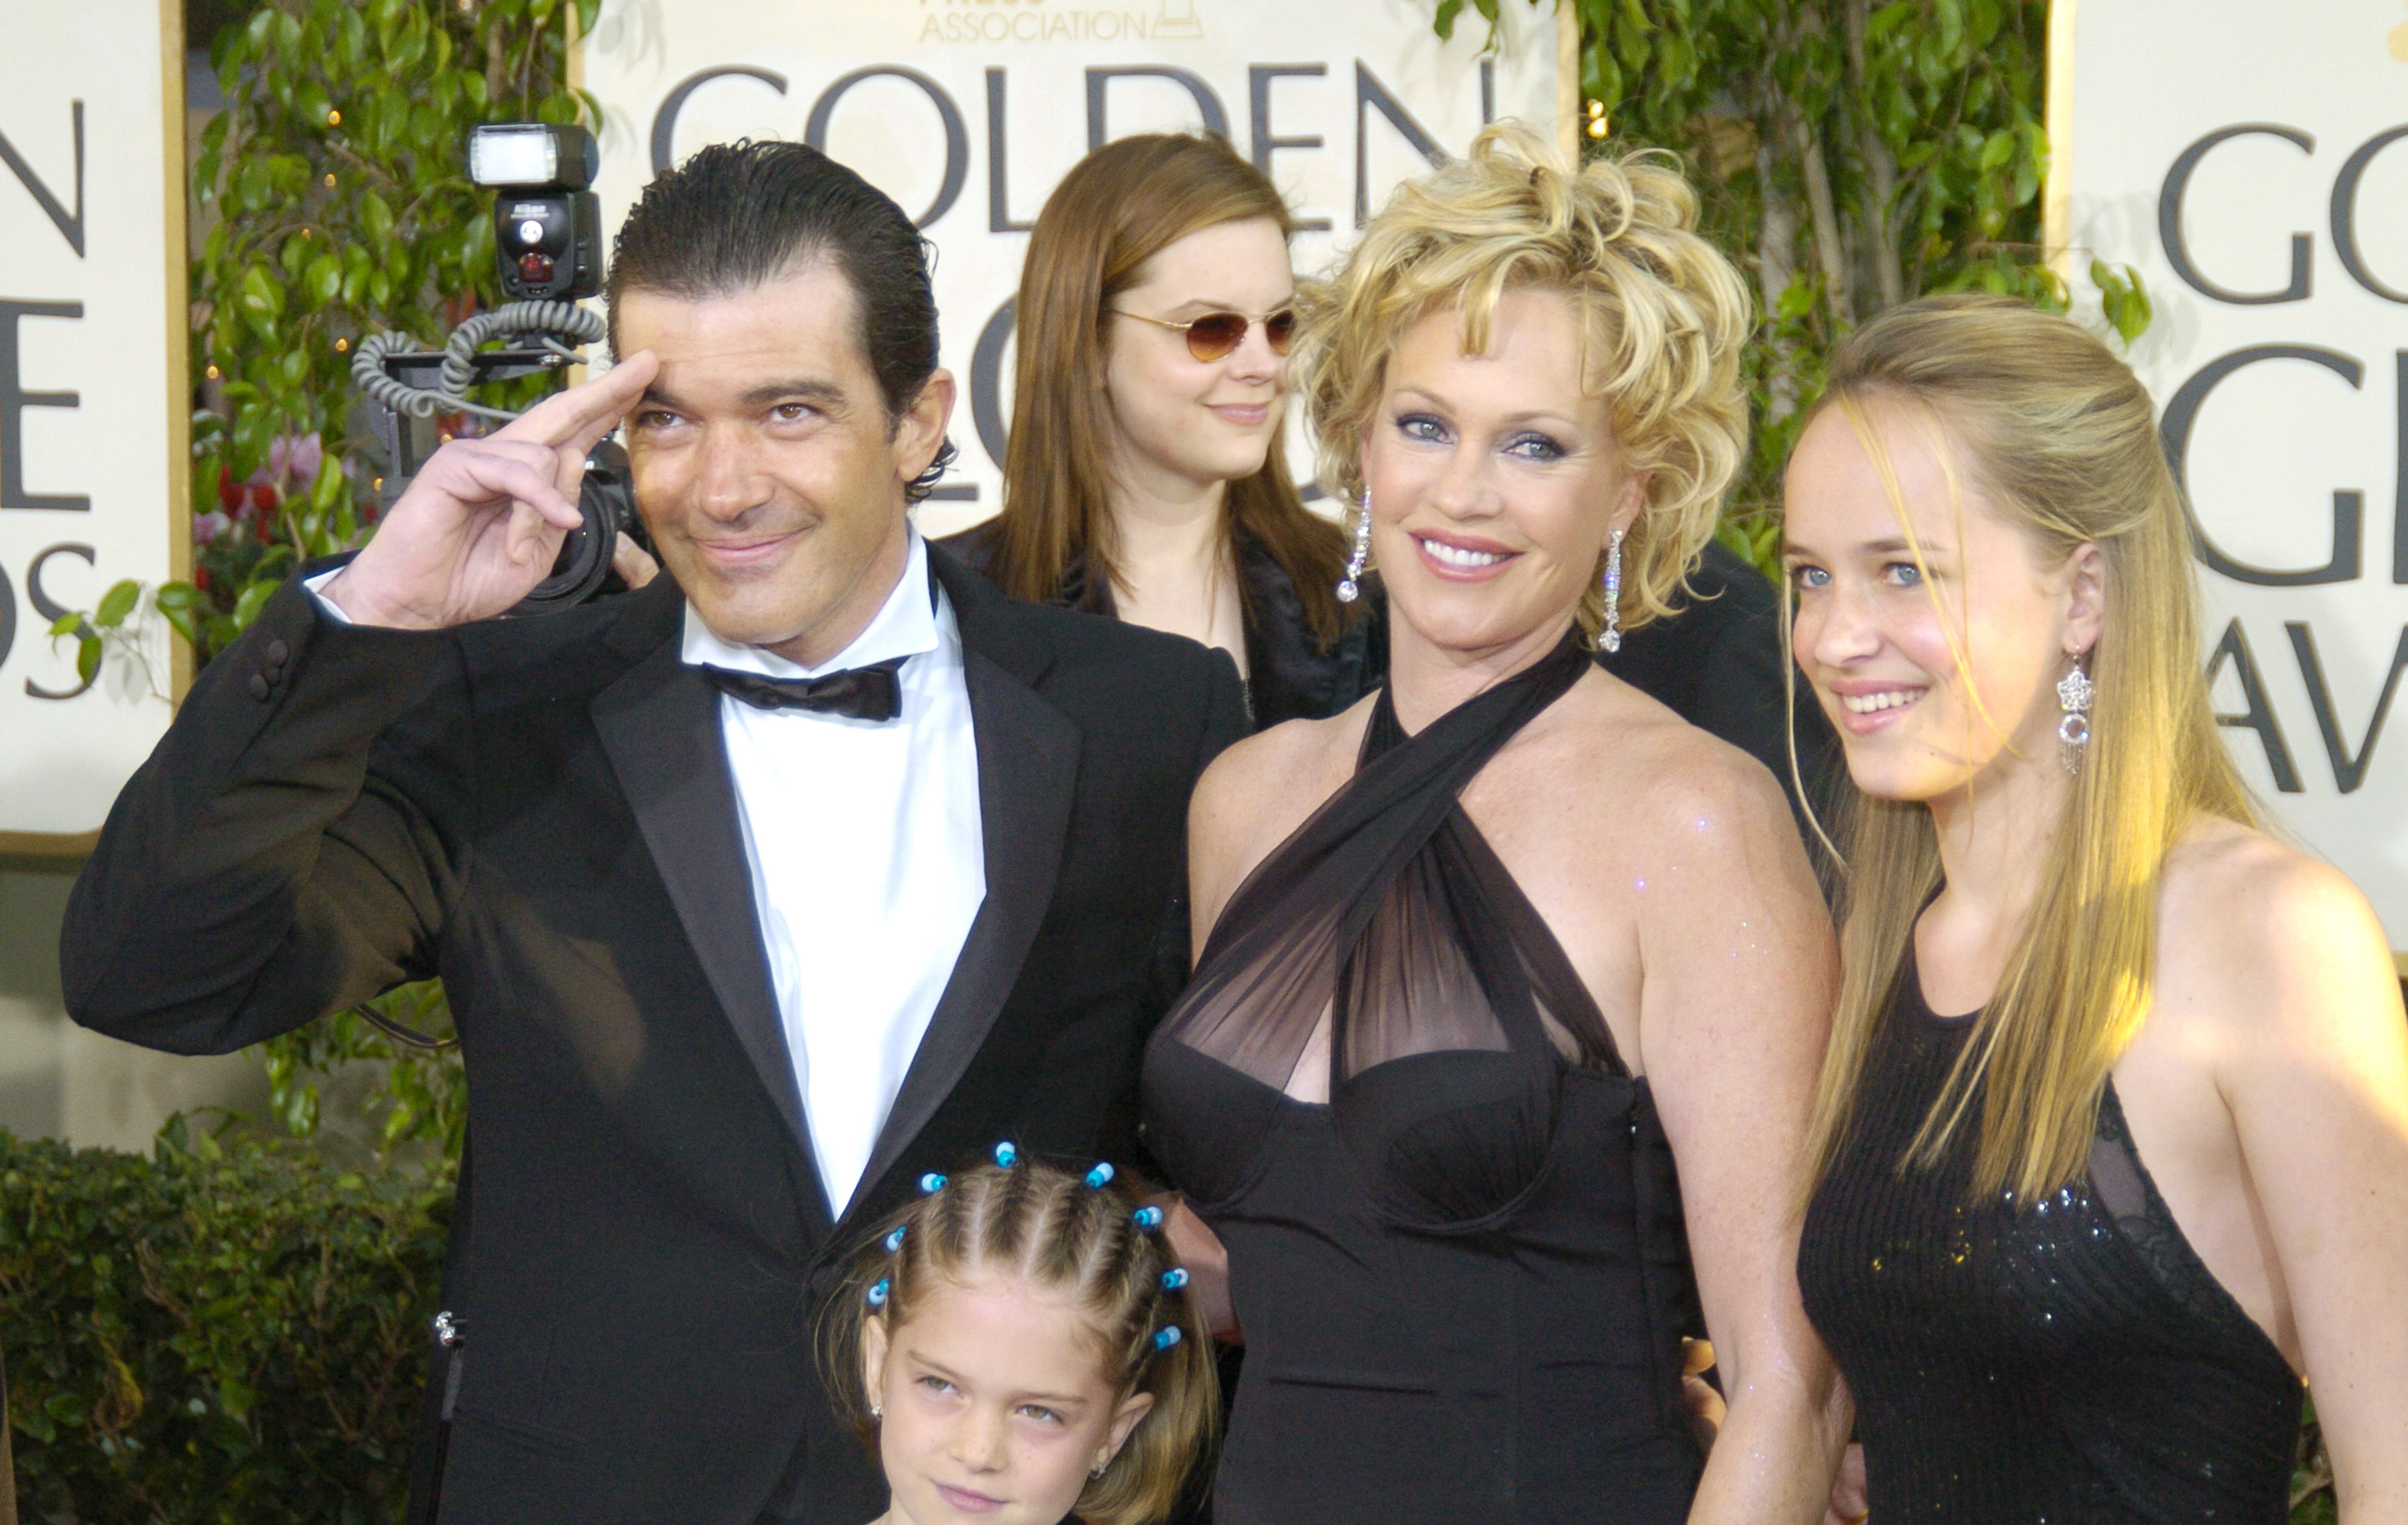 Antonio Banderas, Melanie Griffith and children during The 61st Annual Golden Globe Awards - Arrivals at The Beverly Hilton Hotel in Beverly Hills, California | Source: Getty Images